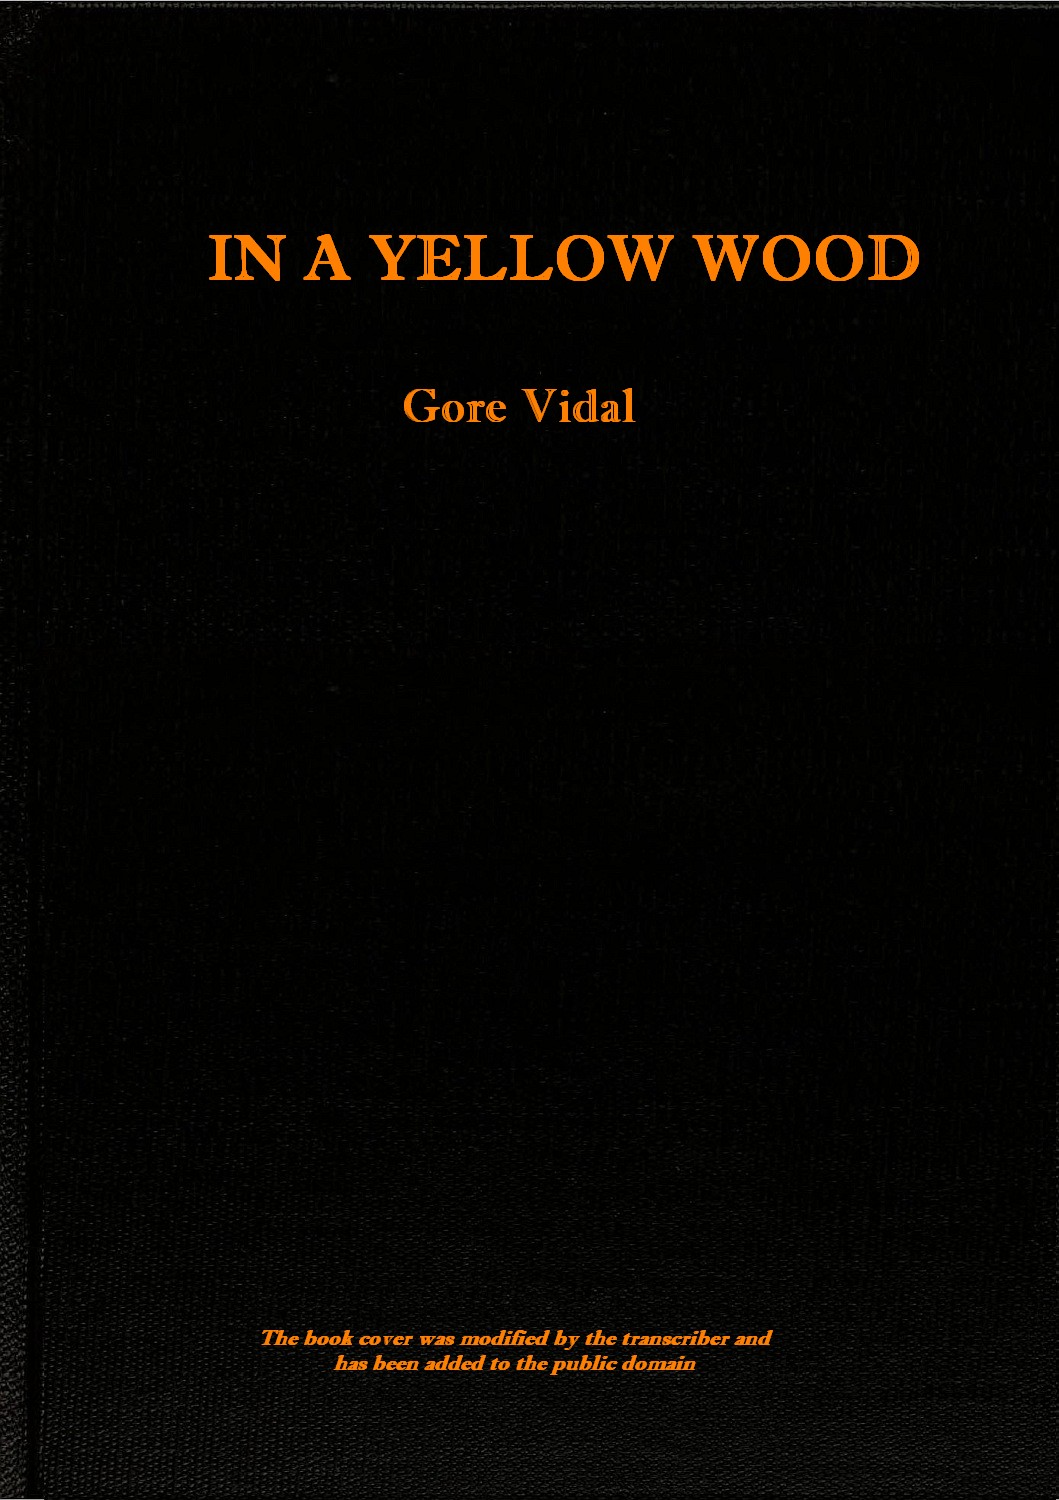 In a Yellow Wood